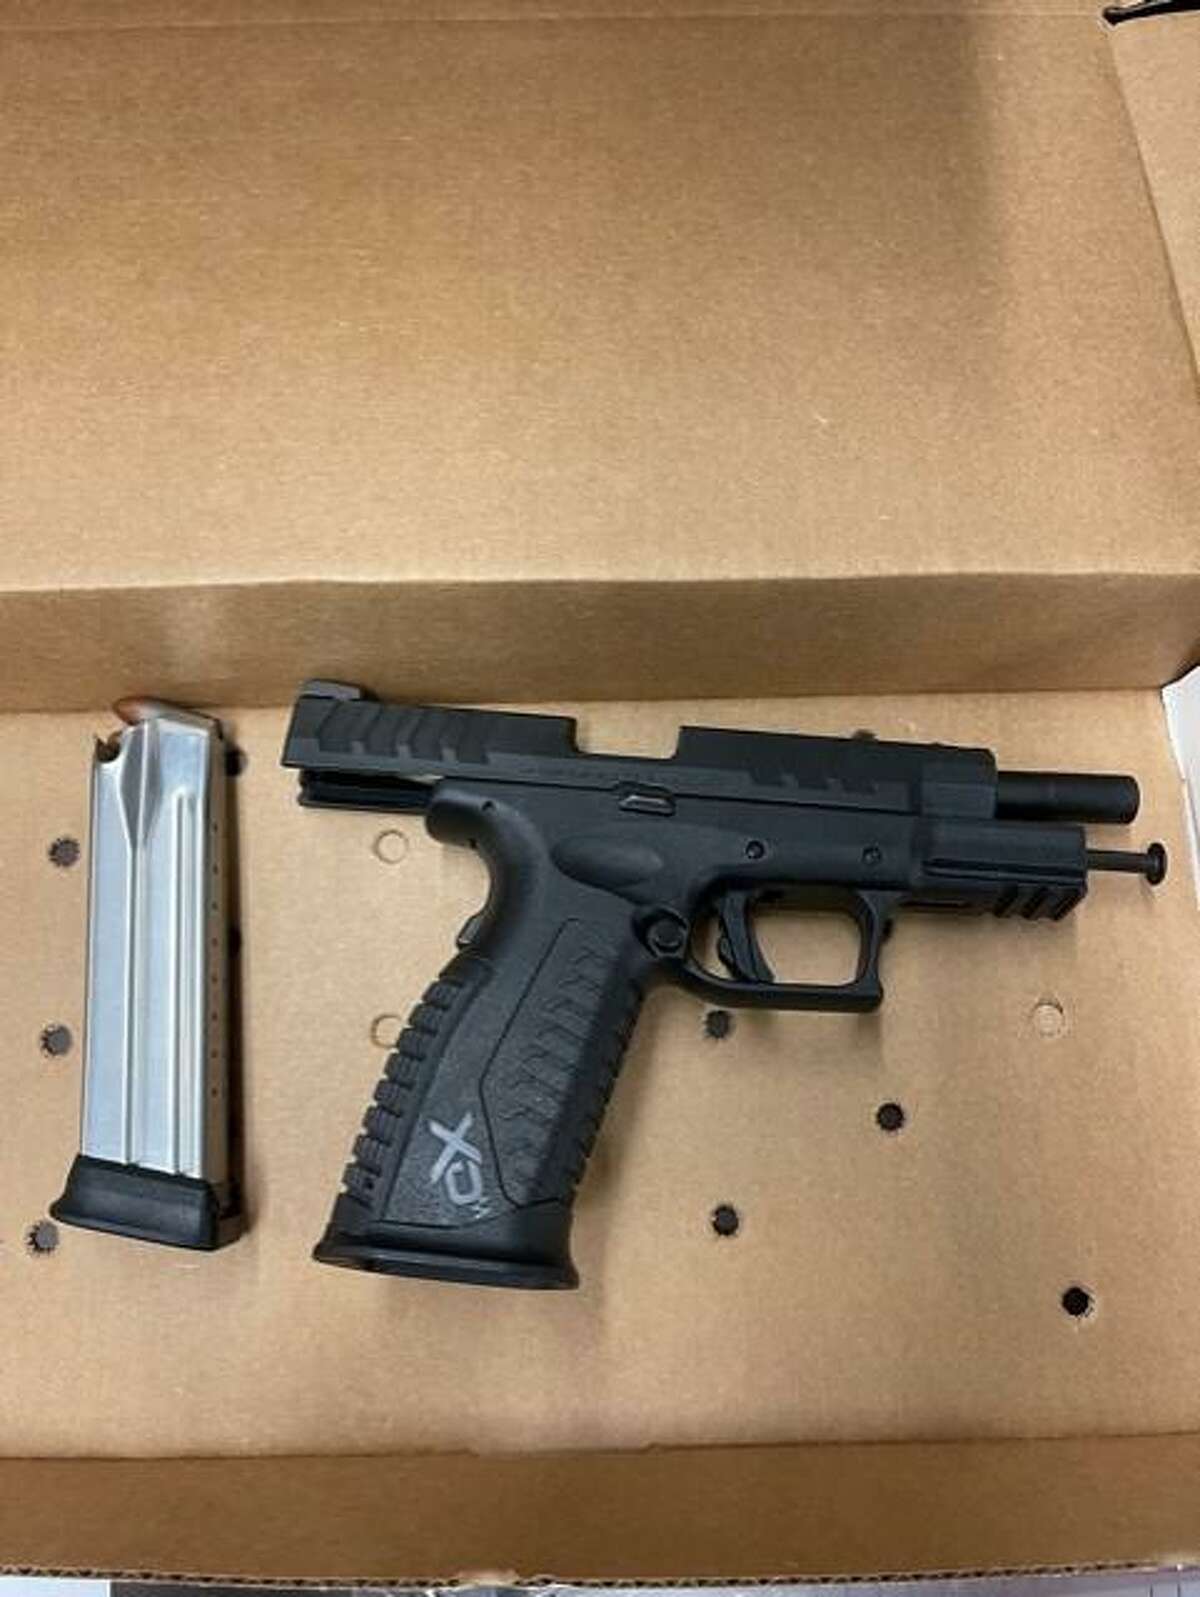 One of the guns seized from a Bridgeport, Conn., business during a search warrant service on Monday, Aug. 16, 2021.